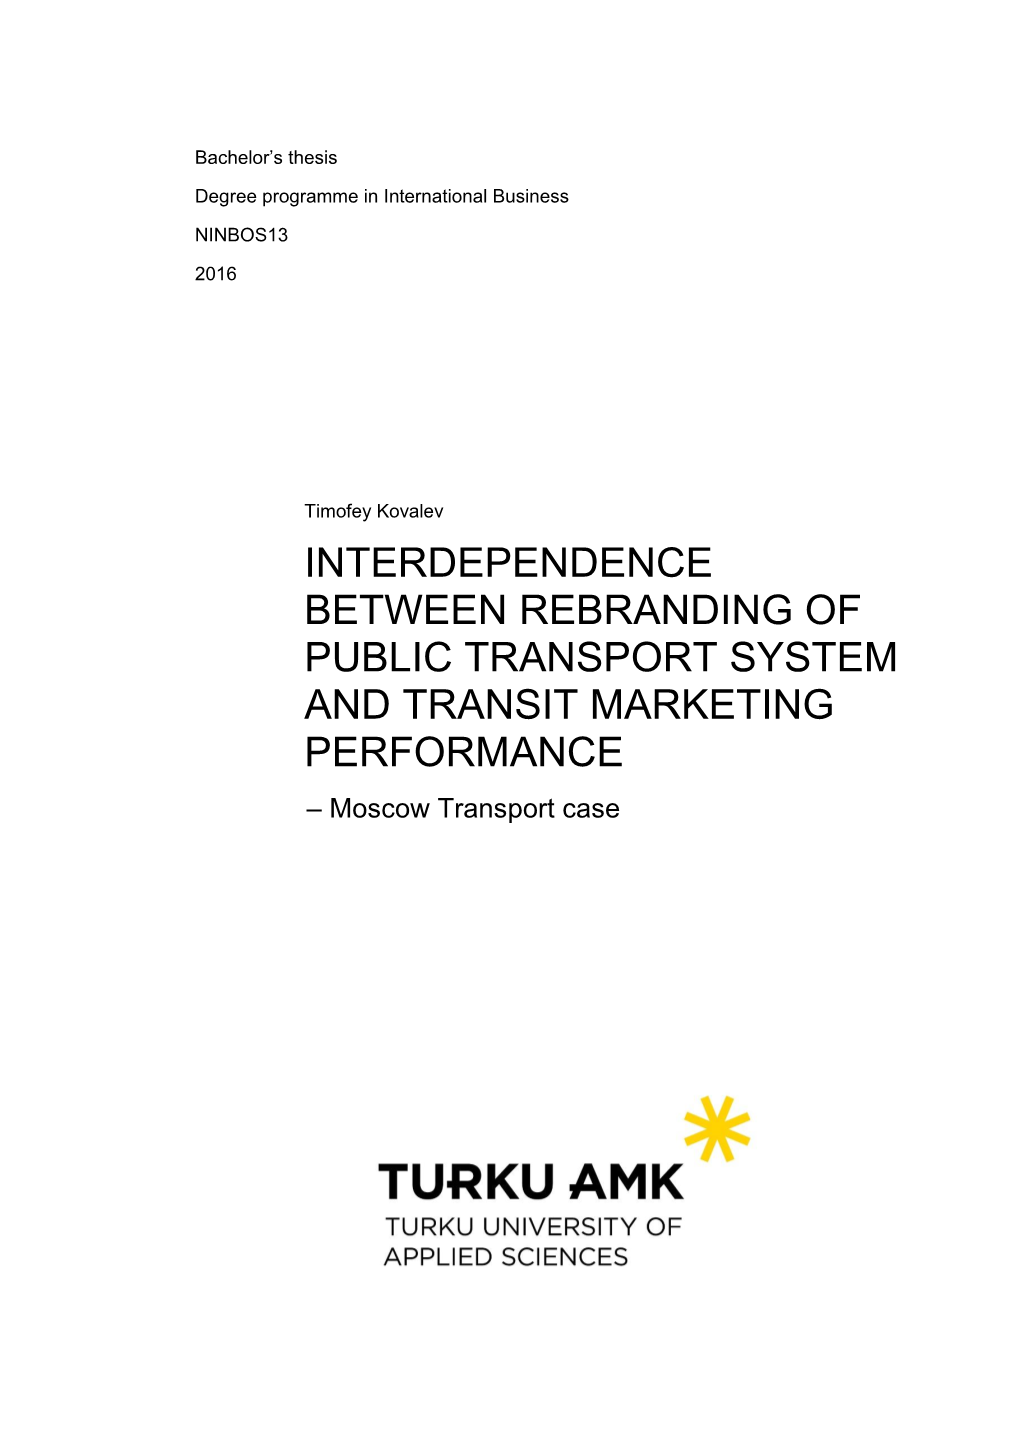 INTERDEPENDENCE BETWEEN REBRANDING of PUBLIC TRANSPORT SYSTEM and TRANSIT MARKETING PERFORMANCE – Moscow Transport Case